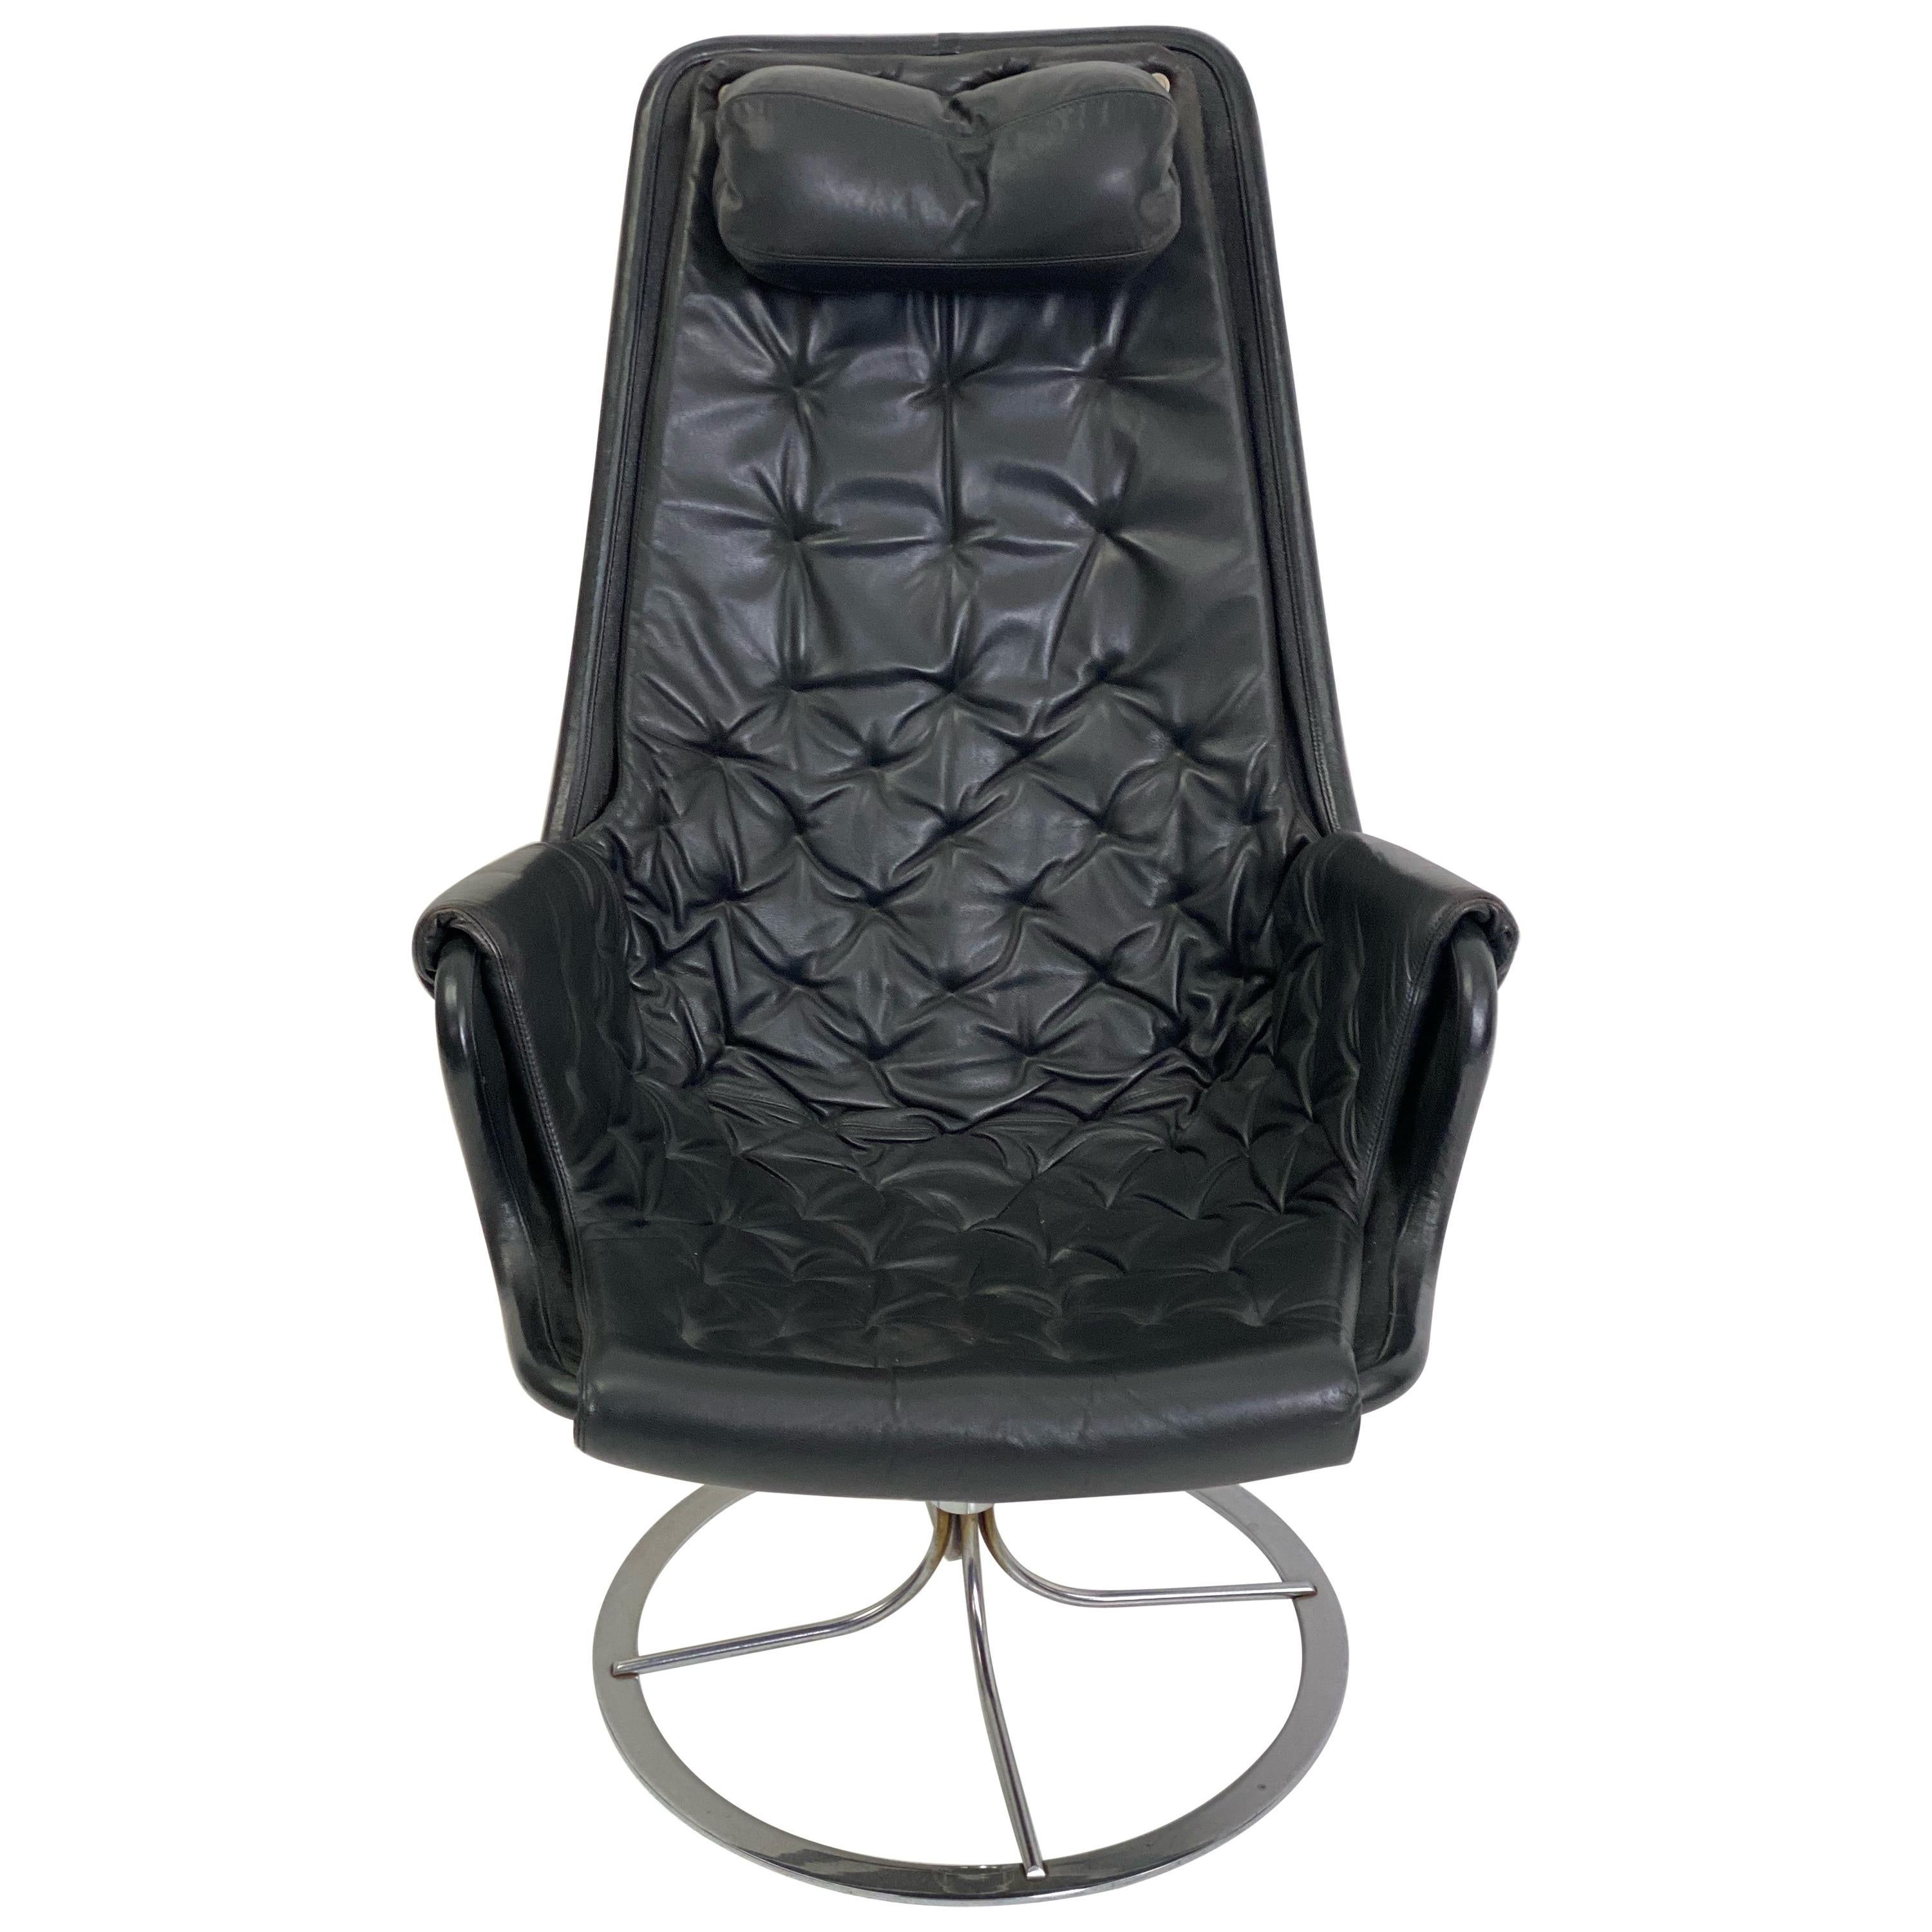 Vintage Jetson High Back Swivel Lounge Chair in black leather by Bruno Mathsson.